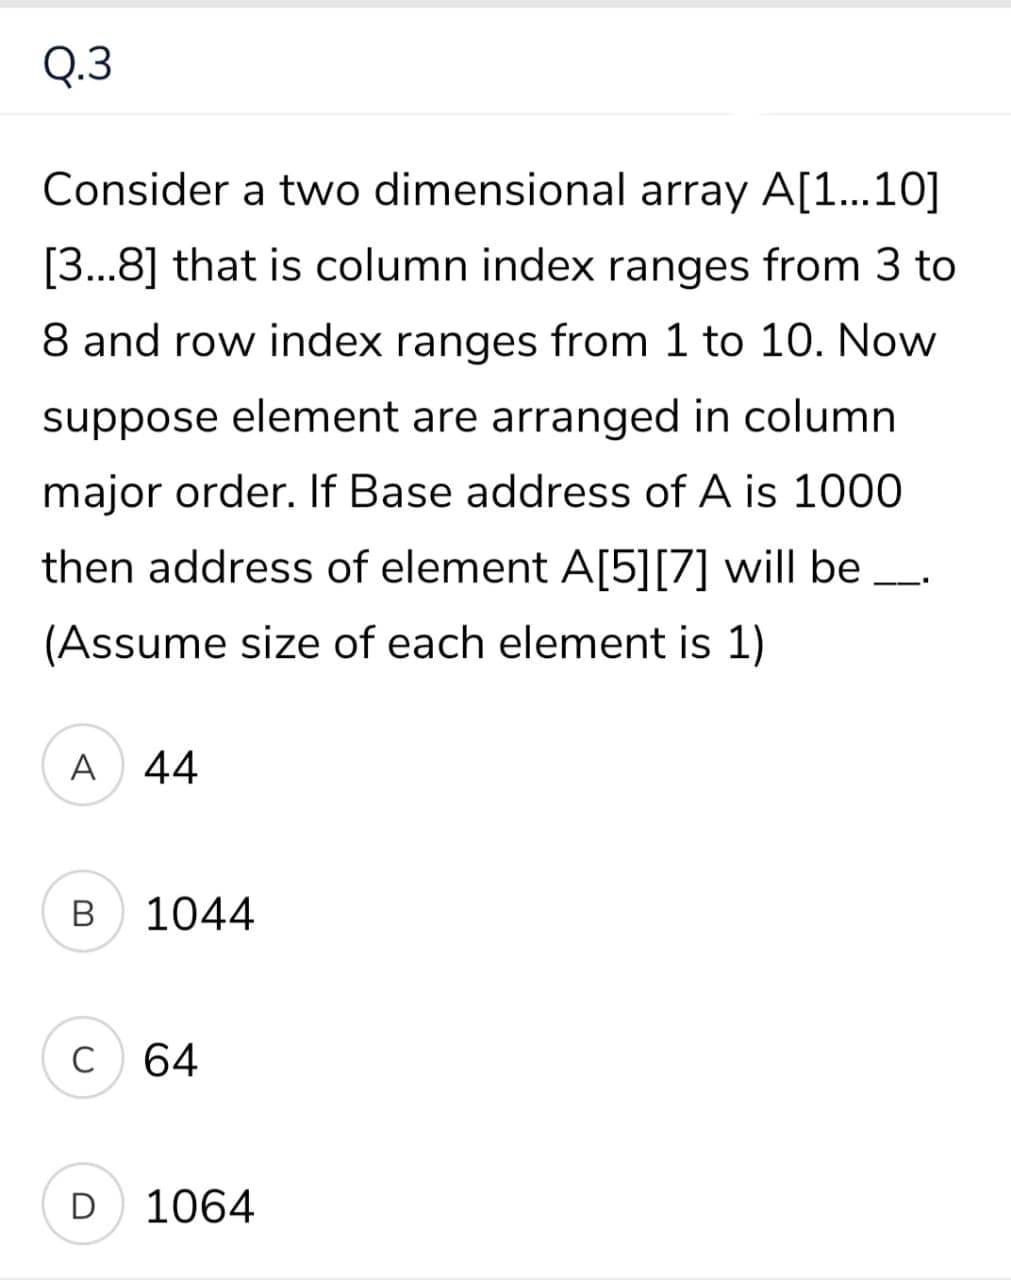 Q.3
Consider a two dimensional array A[1...10]
[3...8] that is column index ranges from 3 to
8 and row index ranges from 1 to 10. Now
suppose element are arranged in column
major order. If Base address of A is 1000
then address of element A[5][7] will be,
(Assume size of each element is 1)
A
A 44
B
1044
C 64
D
1064
